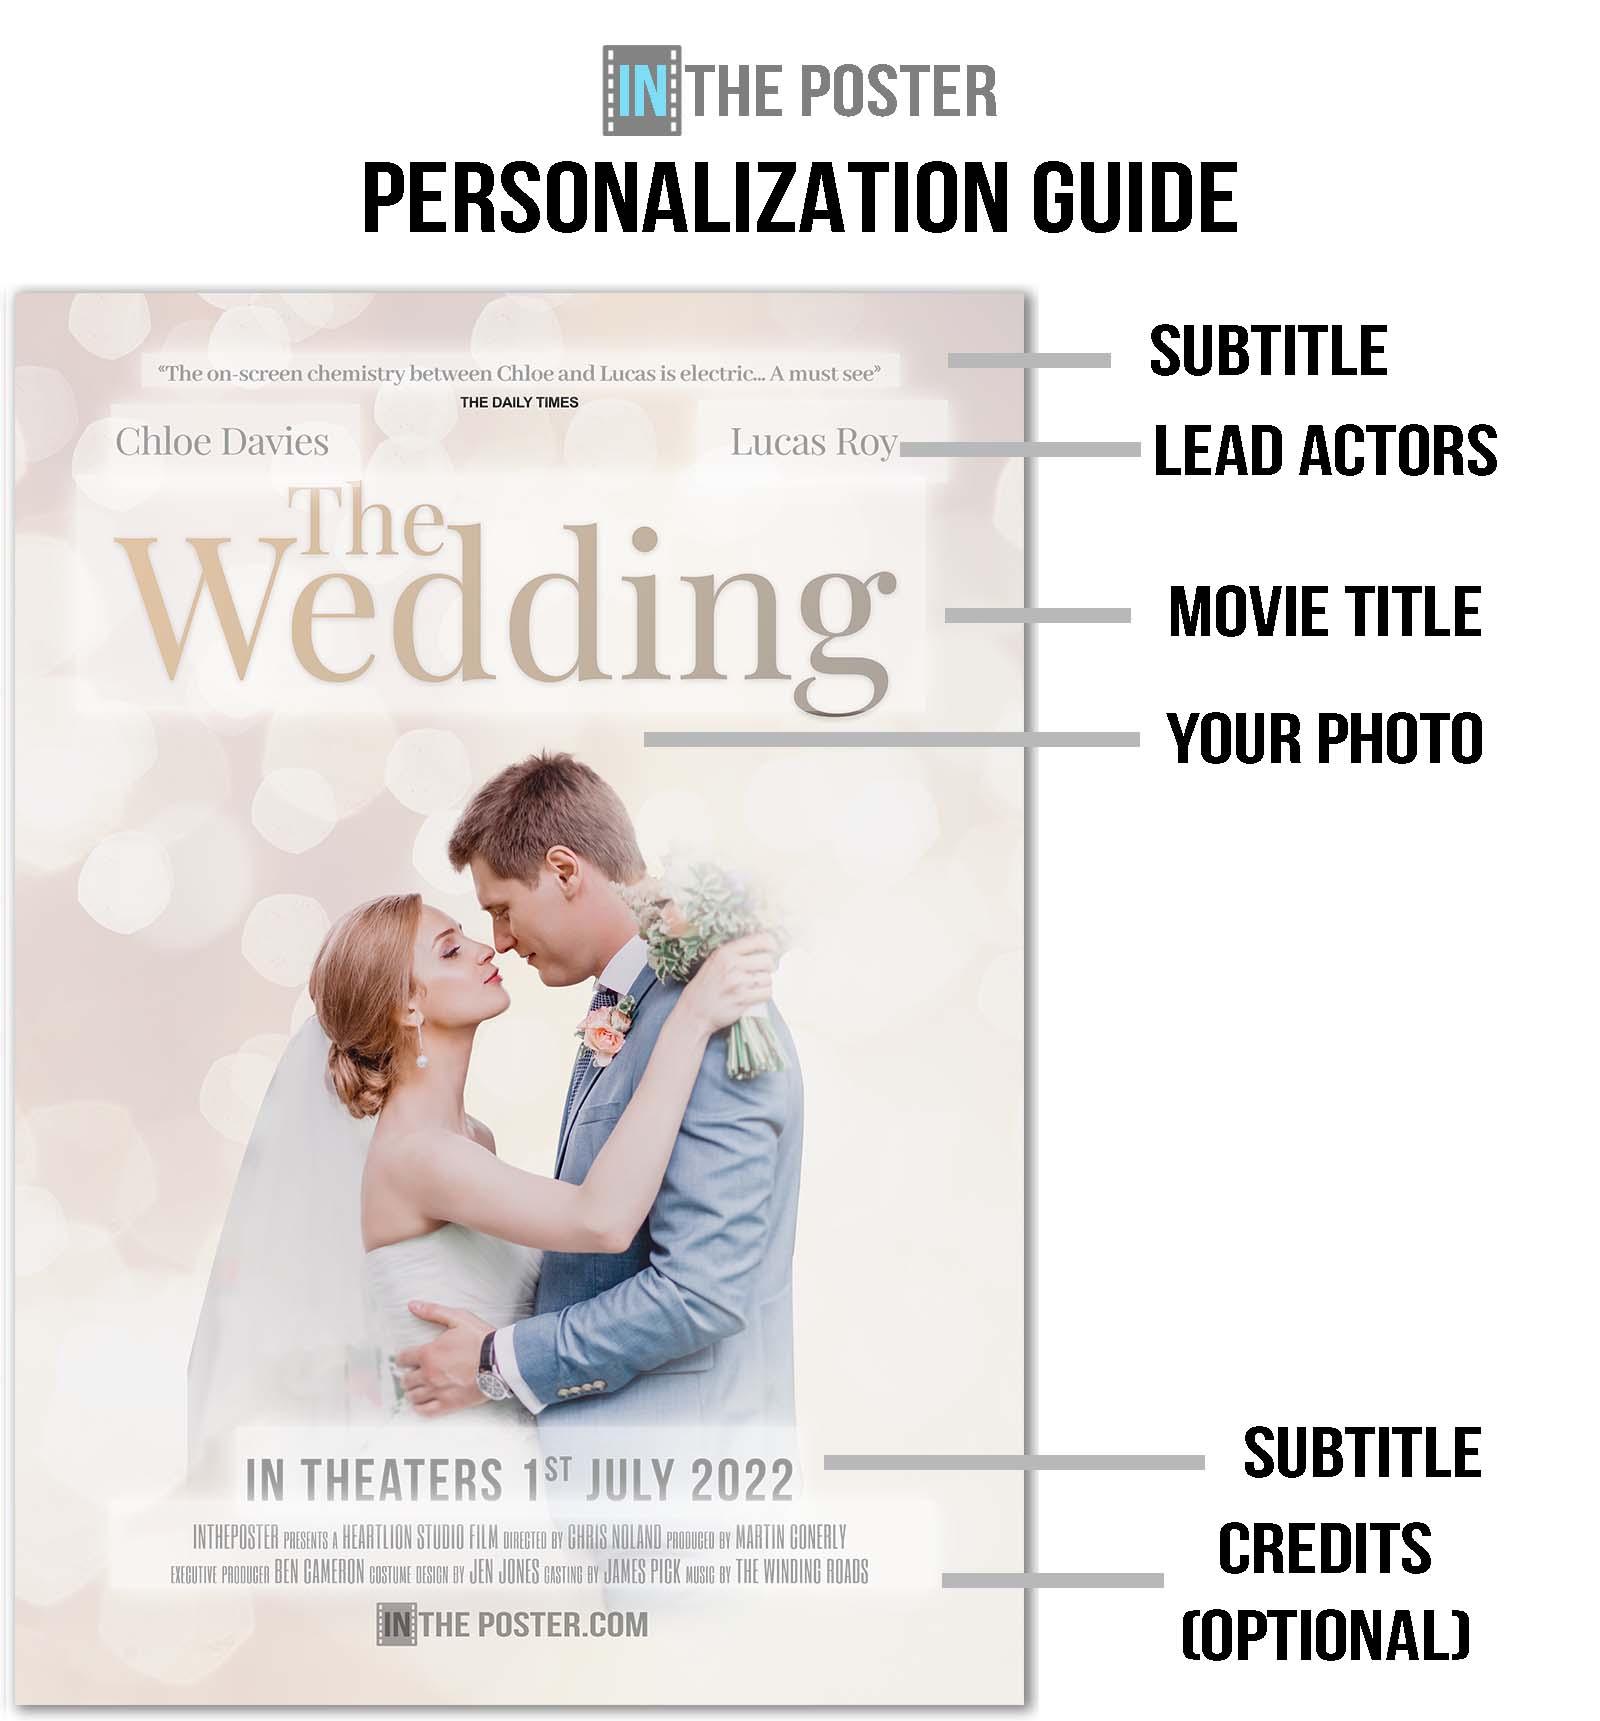 Personalization guide showing how to customize The Wedding Movie Poster and where each movie poster section is